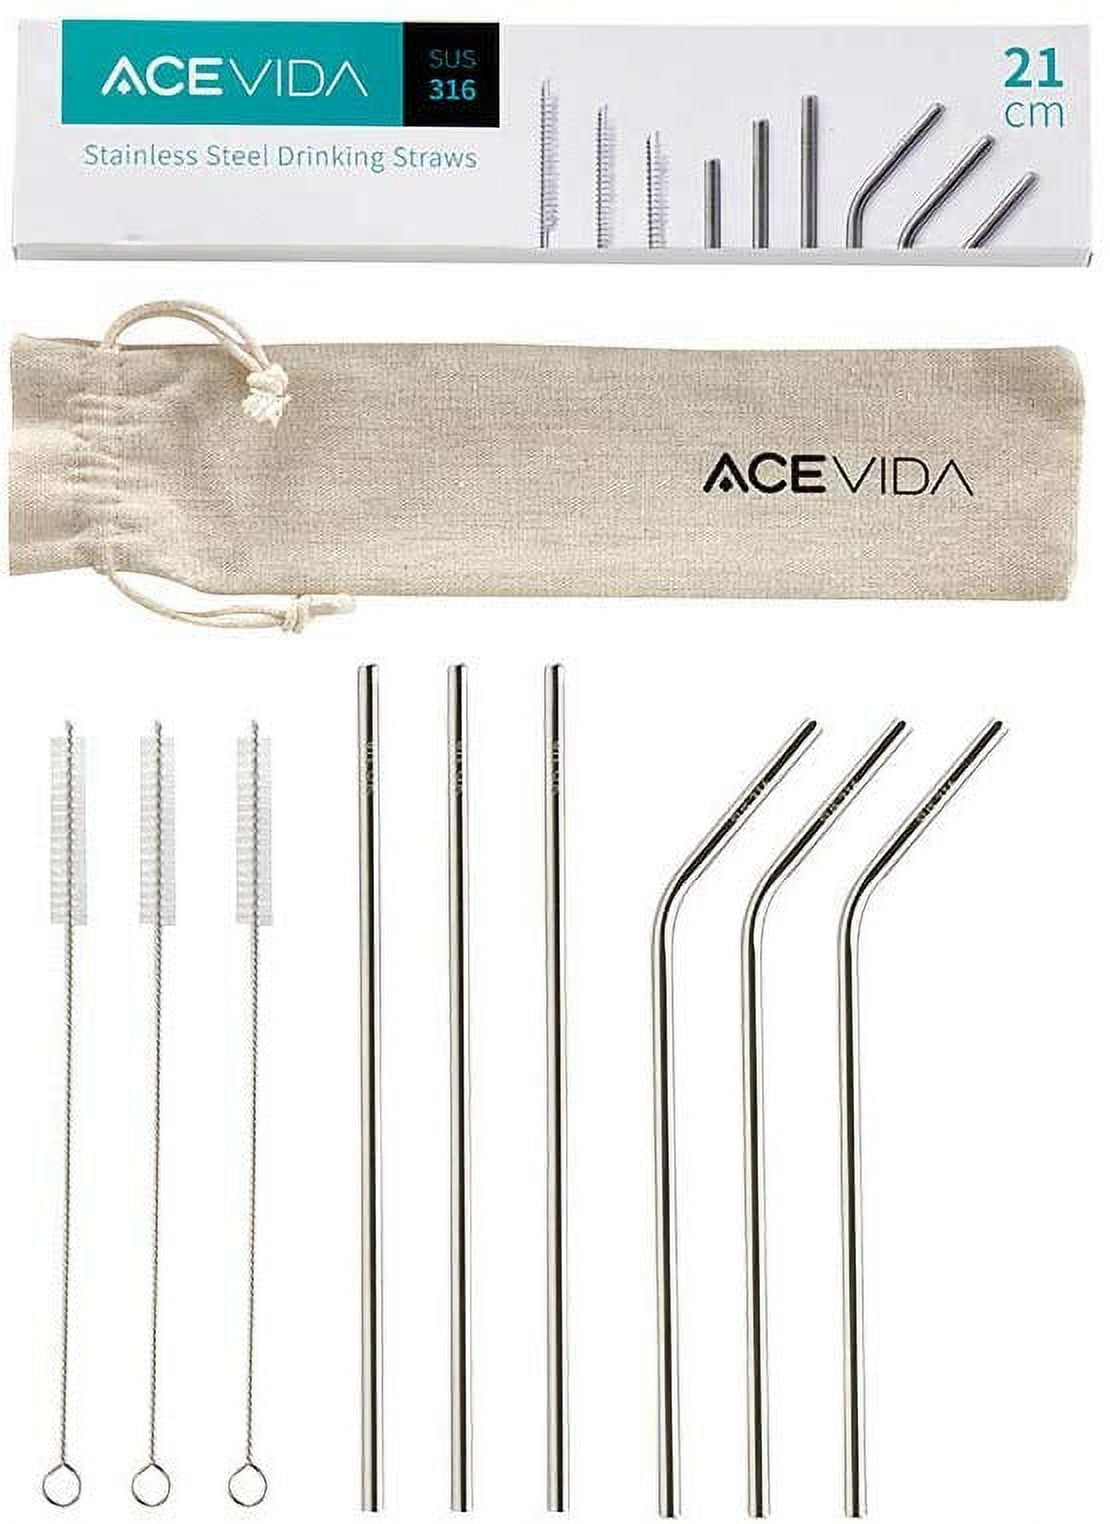 12 Pack Reusable Stainless Steel Straws,8.5 inch Long Eco Friendly Metal Drinking Straws Travel Straws for Tumblers Wine and Cold Drinks Dishwasher